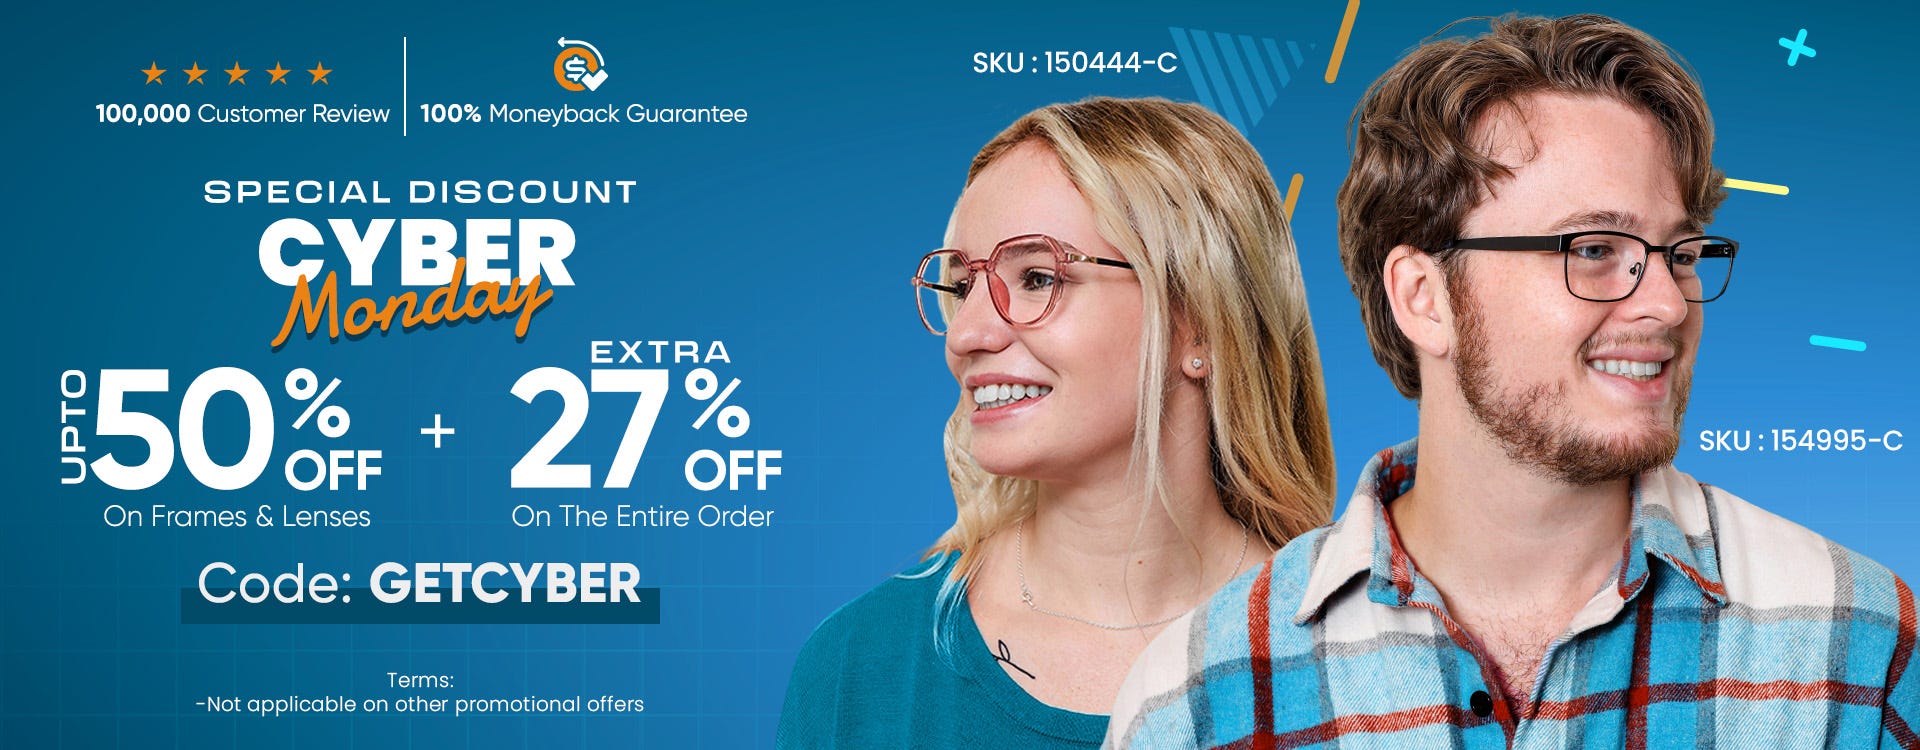 UPTO 50% Discount On All Frames & Lenses + 27% OFF On The Entire Order CODE: GETCYBER